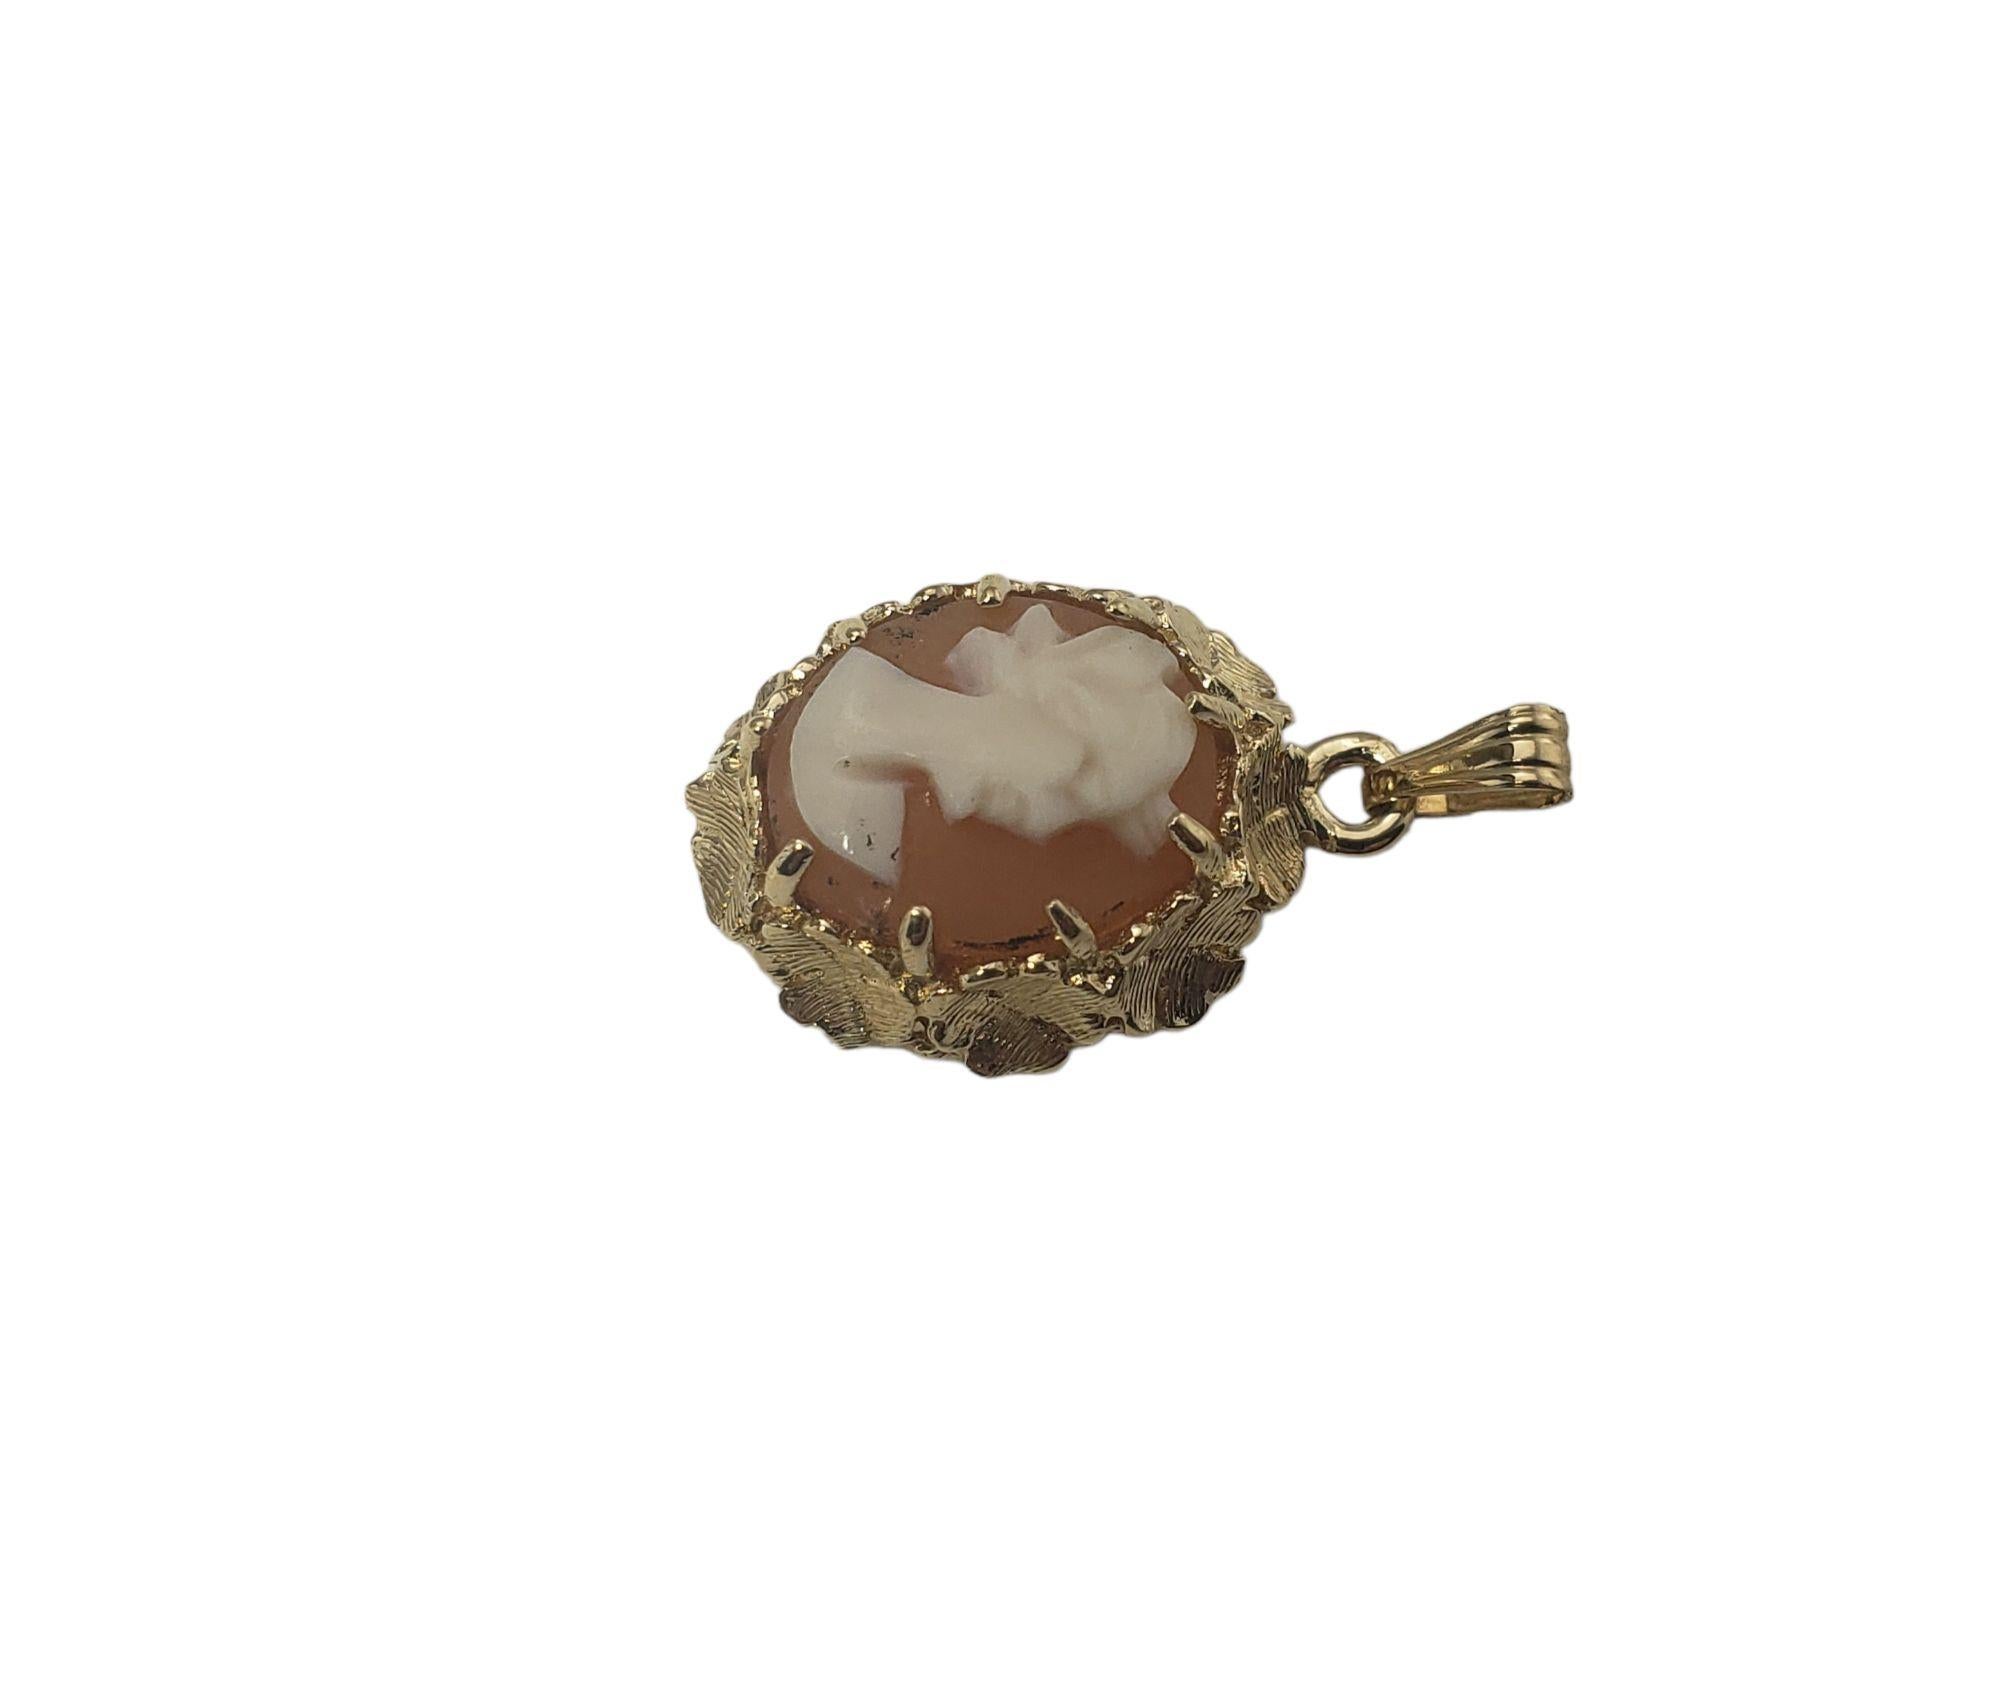 This elegant cameo features a lovely lady in profile set in classic 14K yellow gold.  Can be worn as a brooch or a pendant.

Size:  20 mm x 14 mm

Weight: 1.6 dwt. / 2.6 gr.

Tested 14K gold.

Very good condition, professionally polished.

*Chain